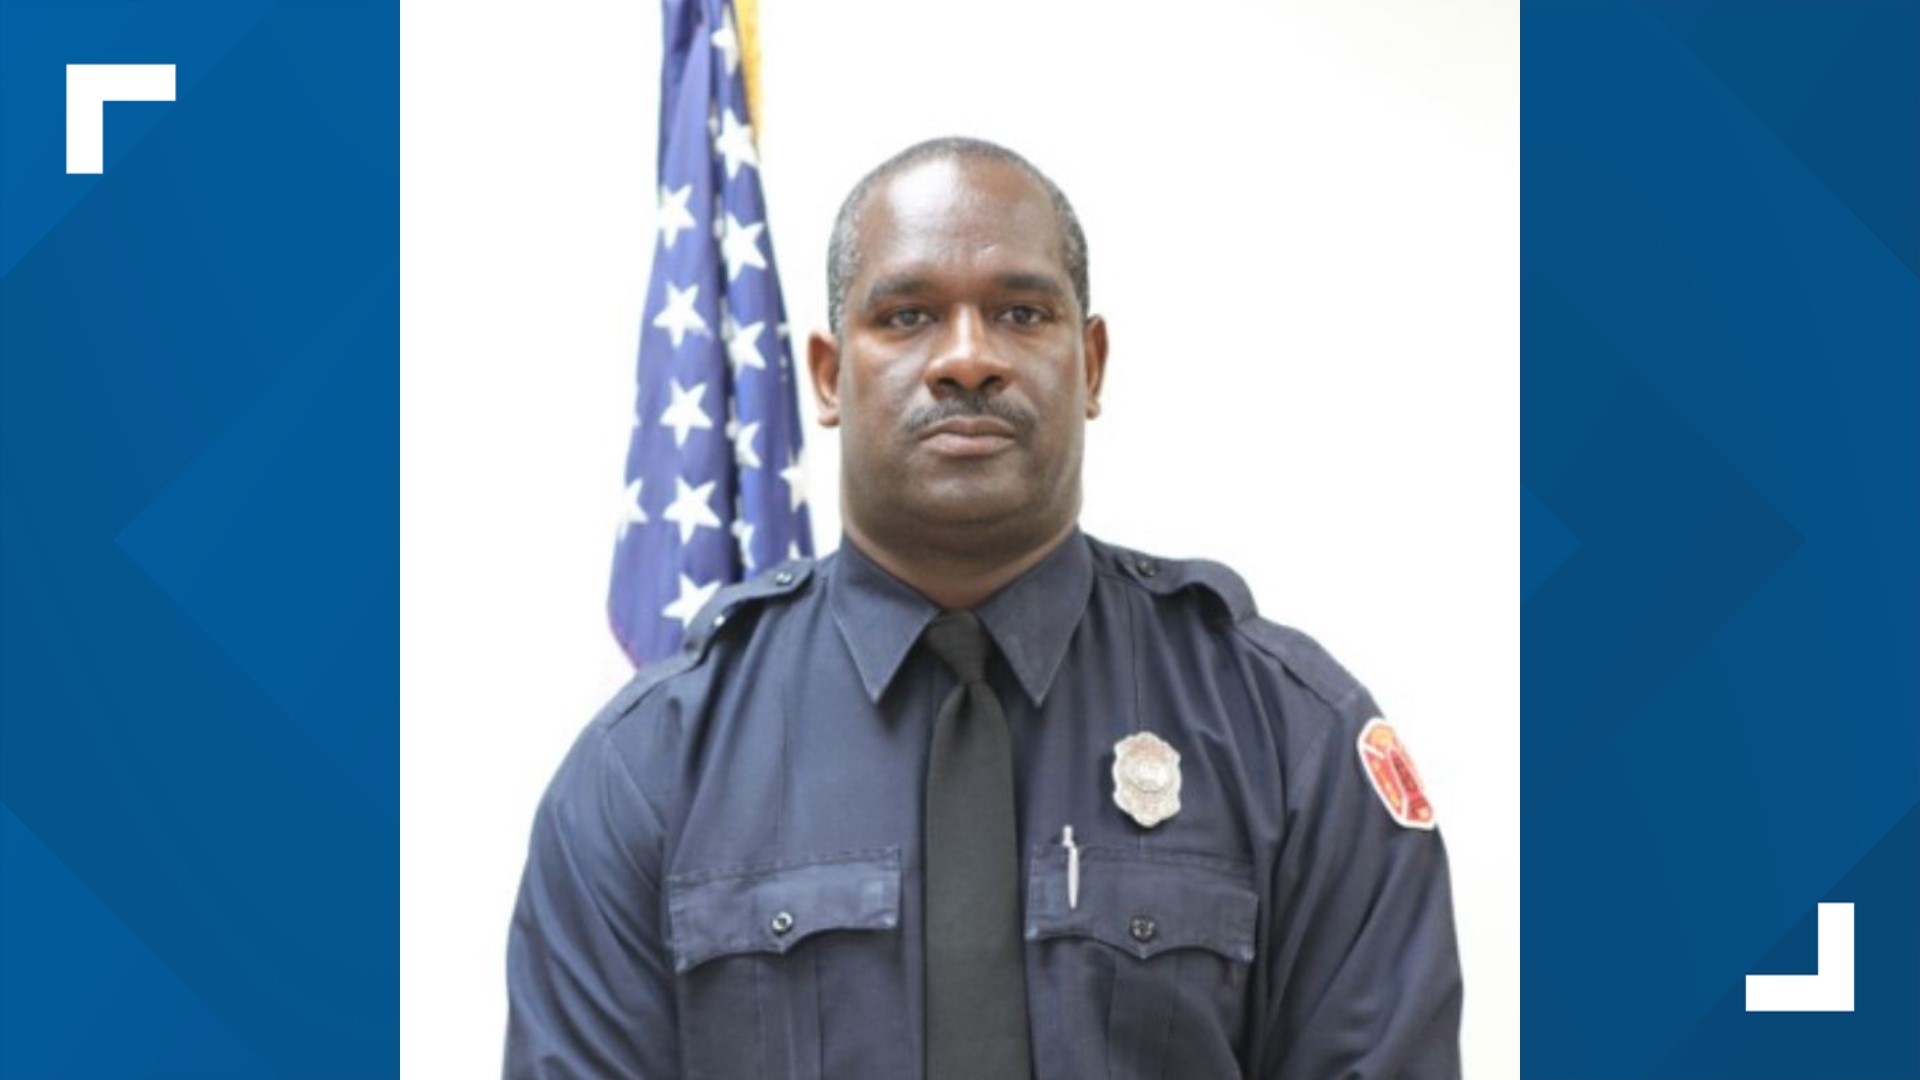 "It is with deep sorrow and profound sadness that we announce the line of duty death of St. Louis firefighter Rodney l. Heard," the department said